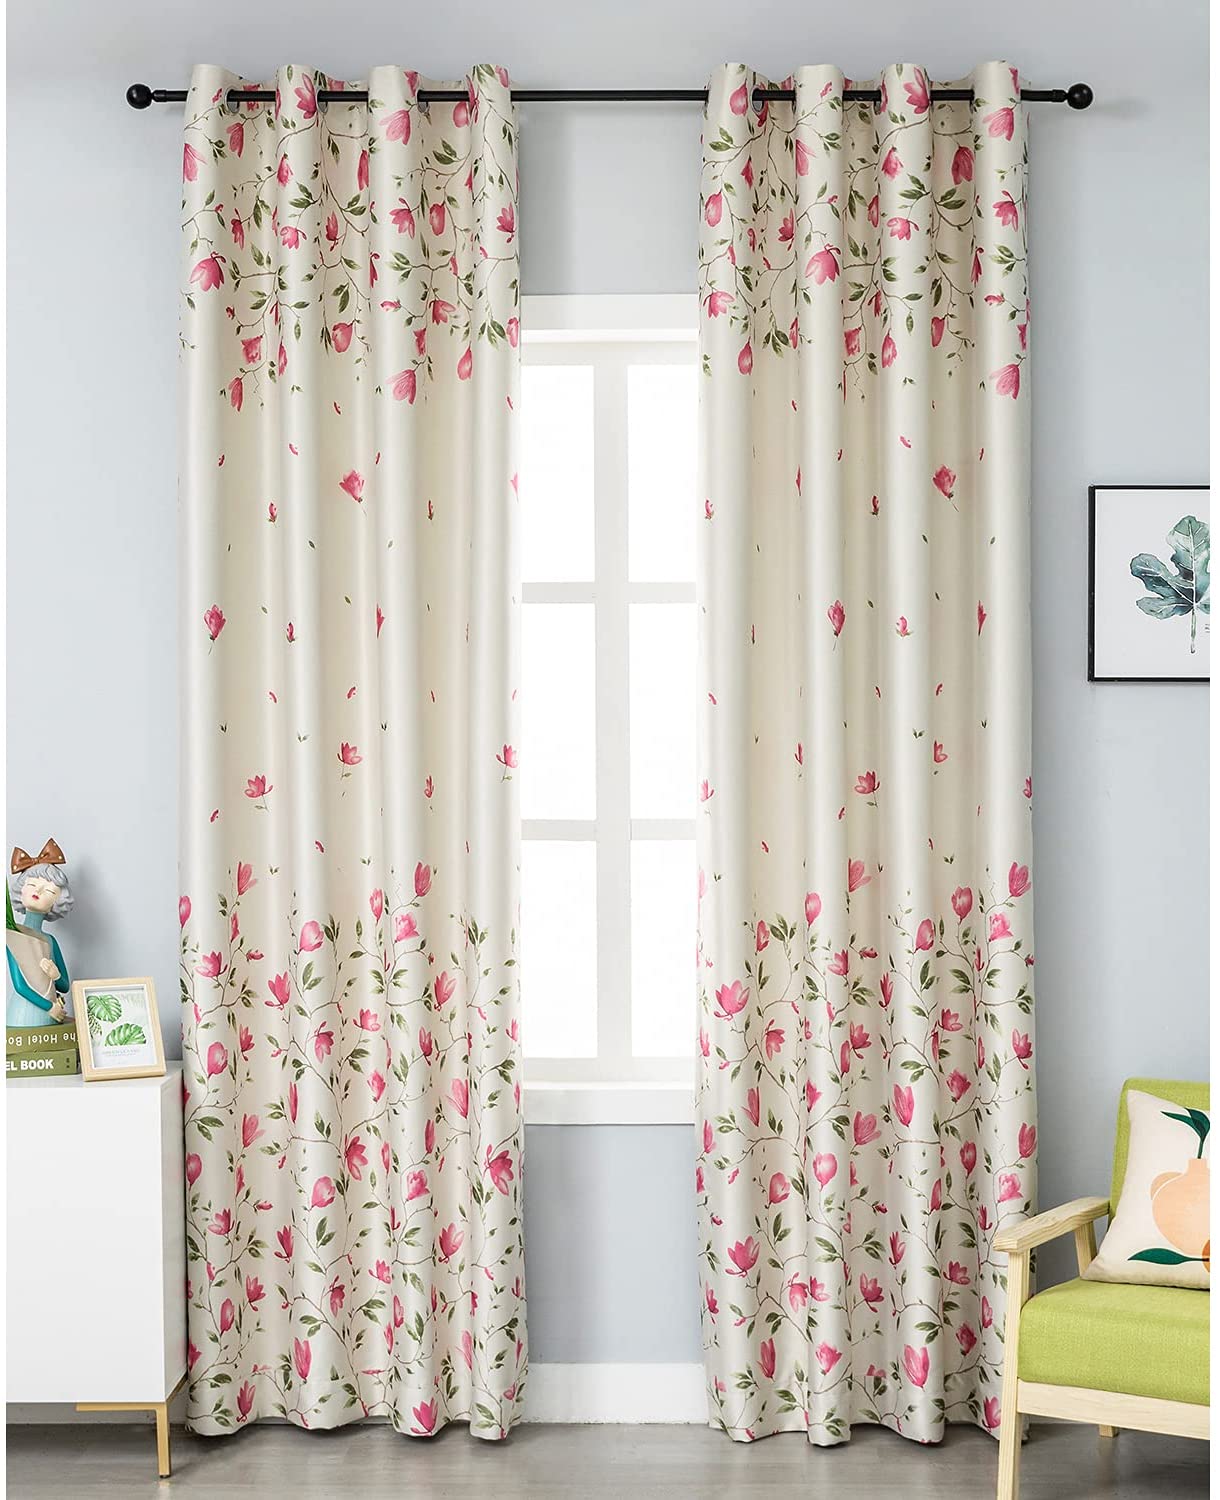 Mastering the Art of Curtain Hanging: Installation, Hardware, Length, and Styles